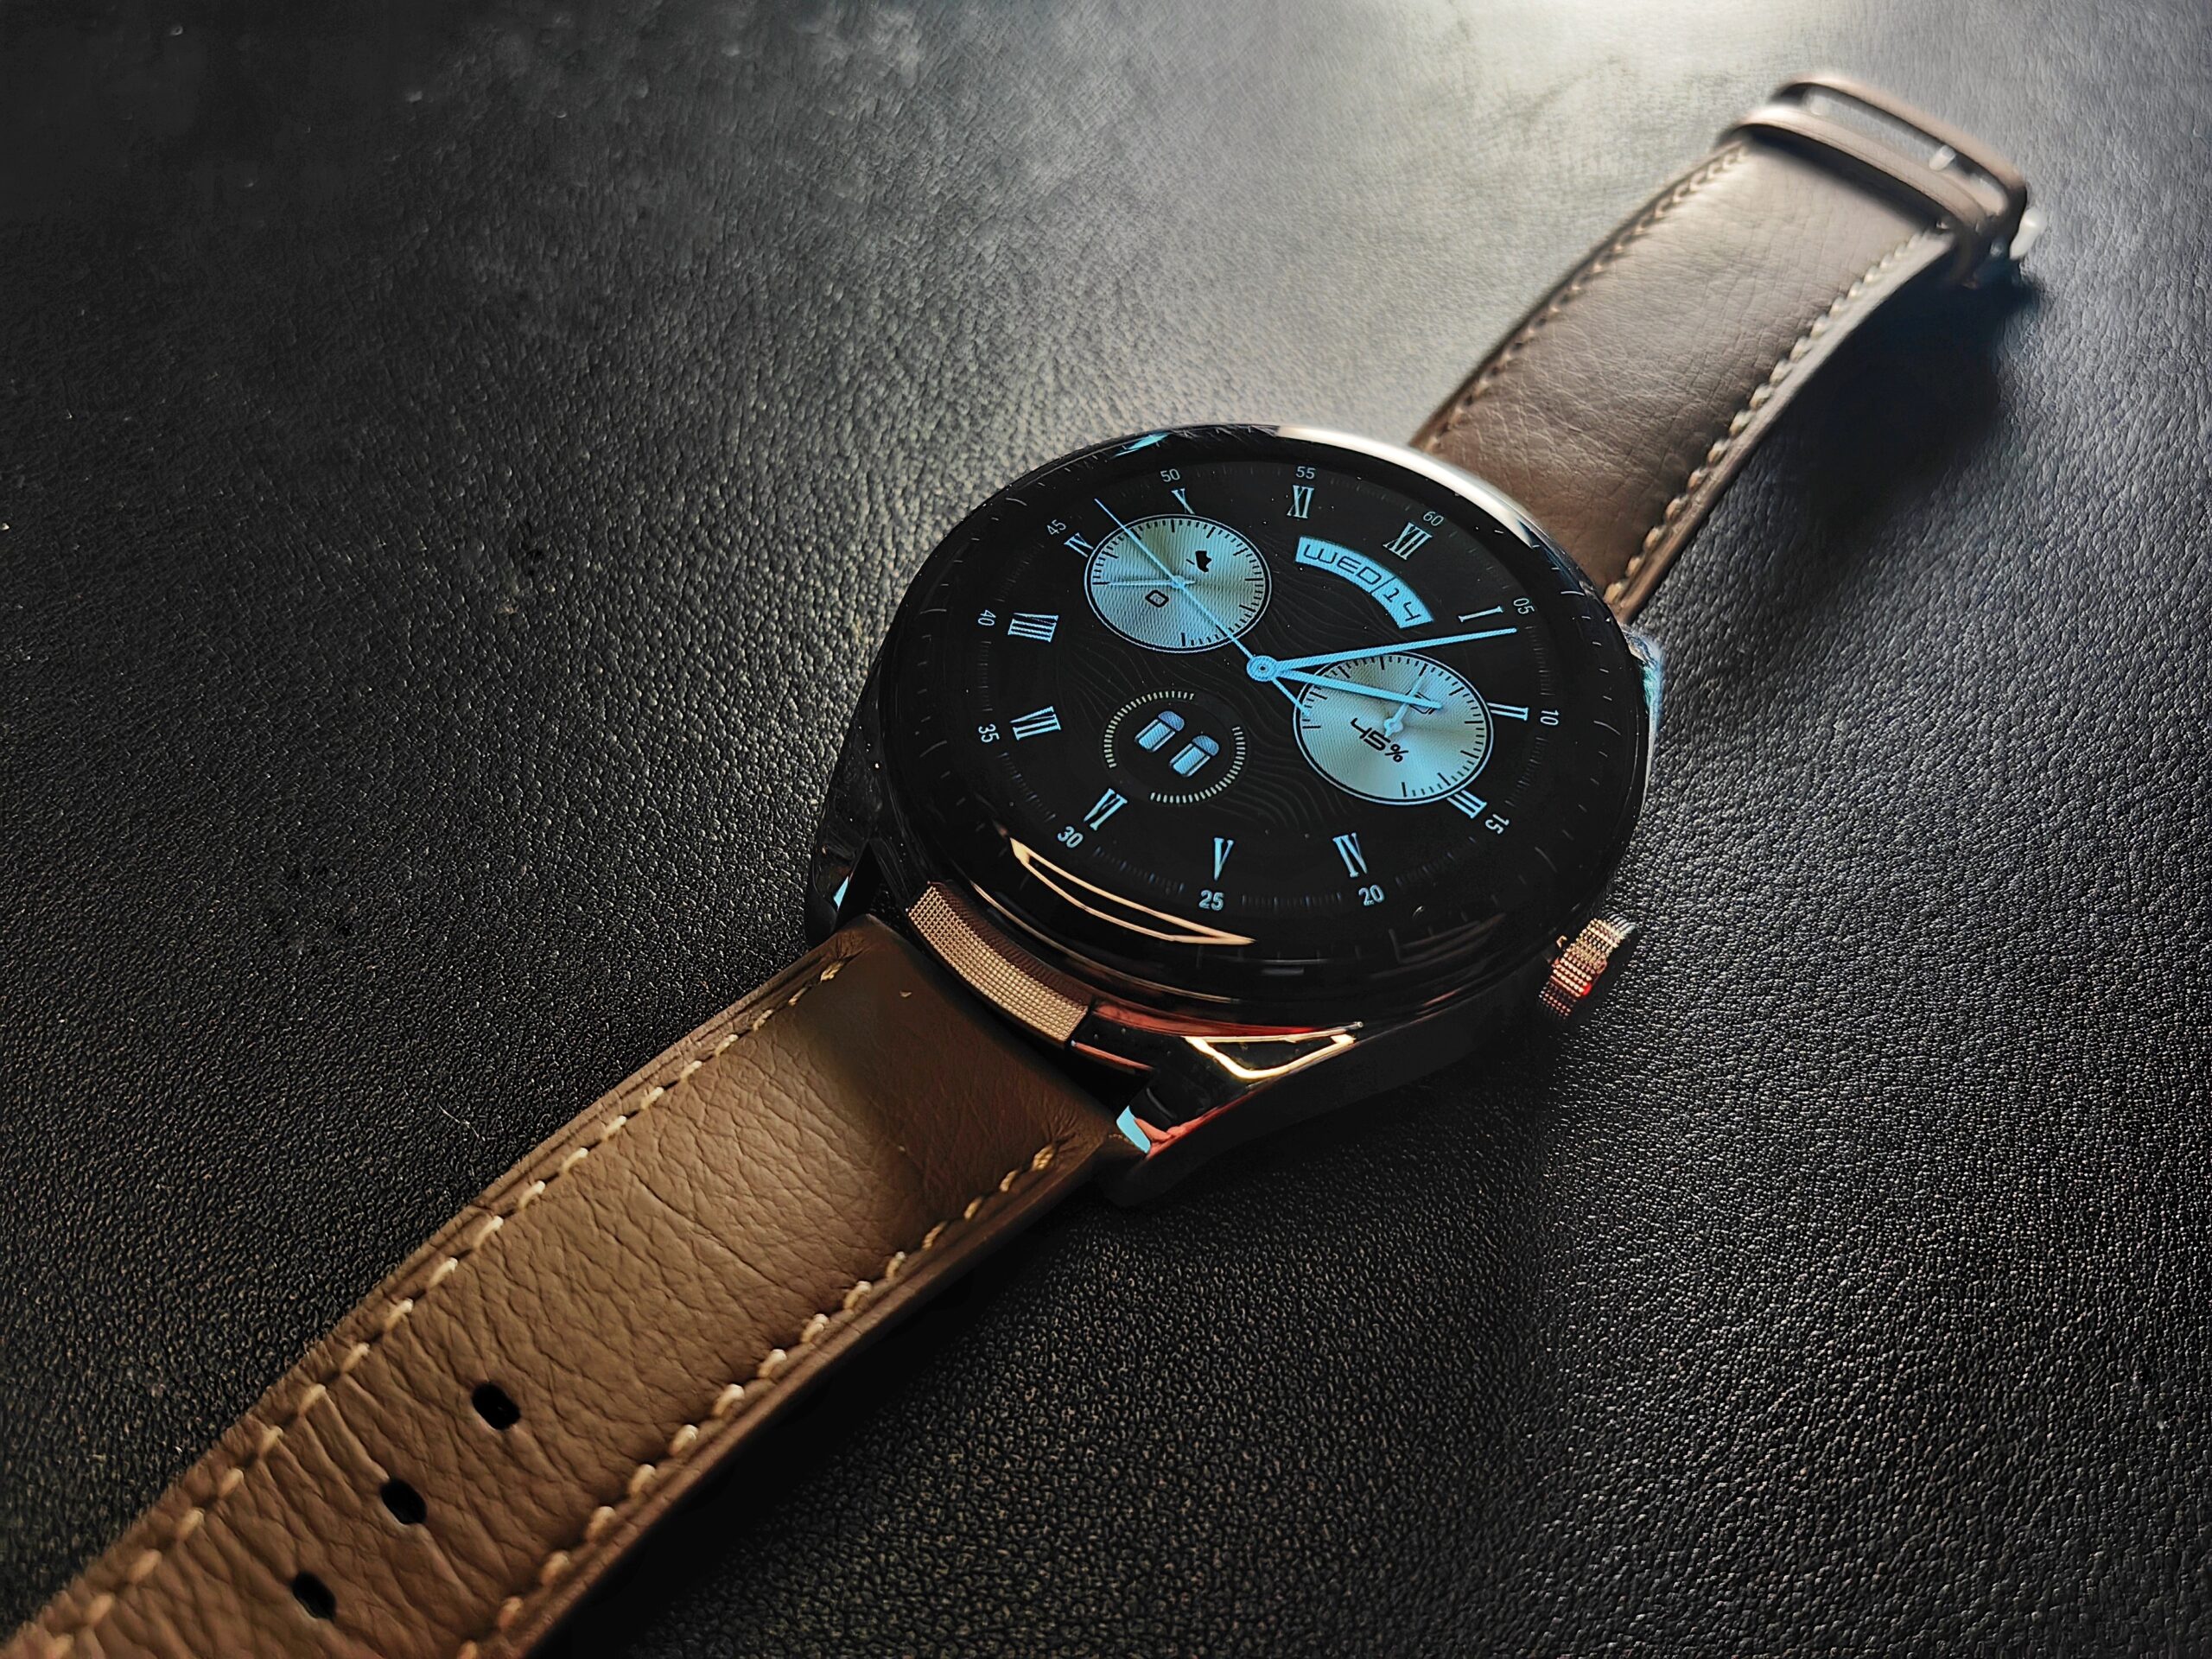 Huawei Watch Buds review: Sleek, pricey smartwatch comes packed